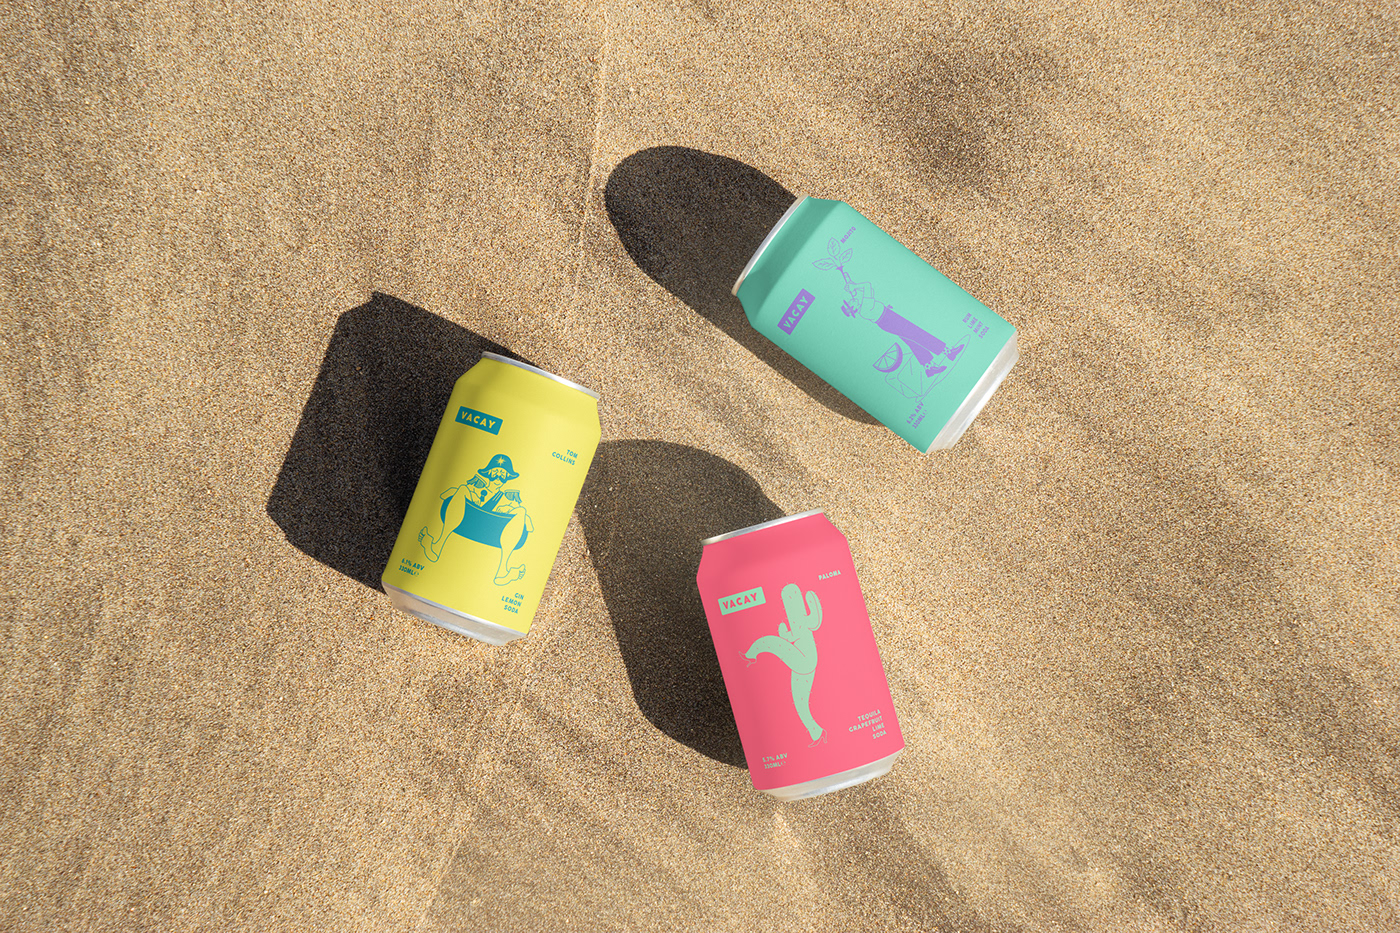 vacay drinks canned drinks cocktails alcohol London Packaging Brand Design visual identity Logo Design